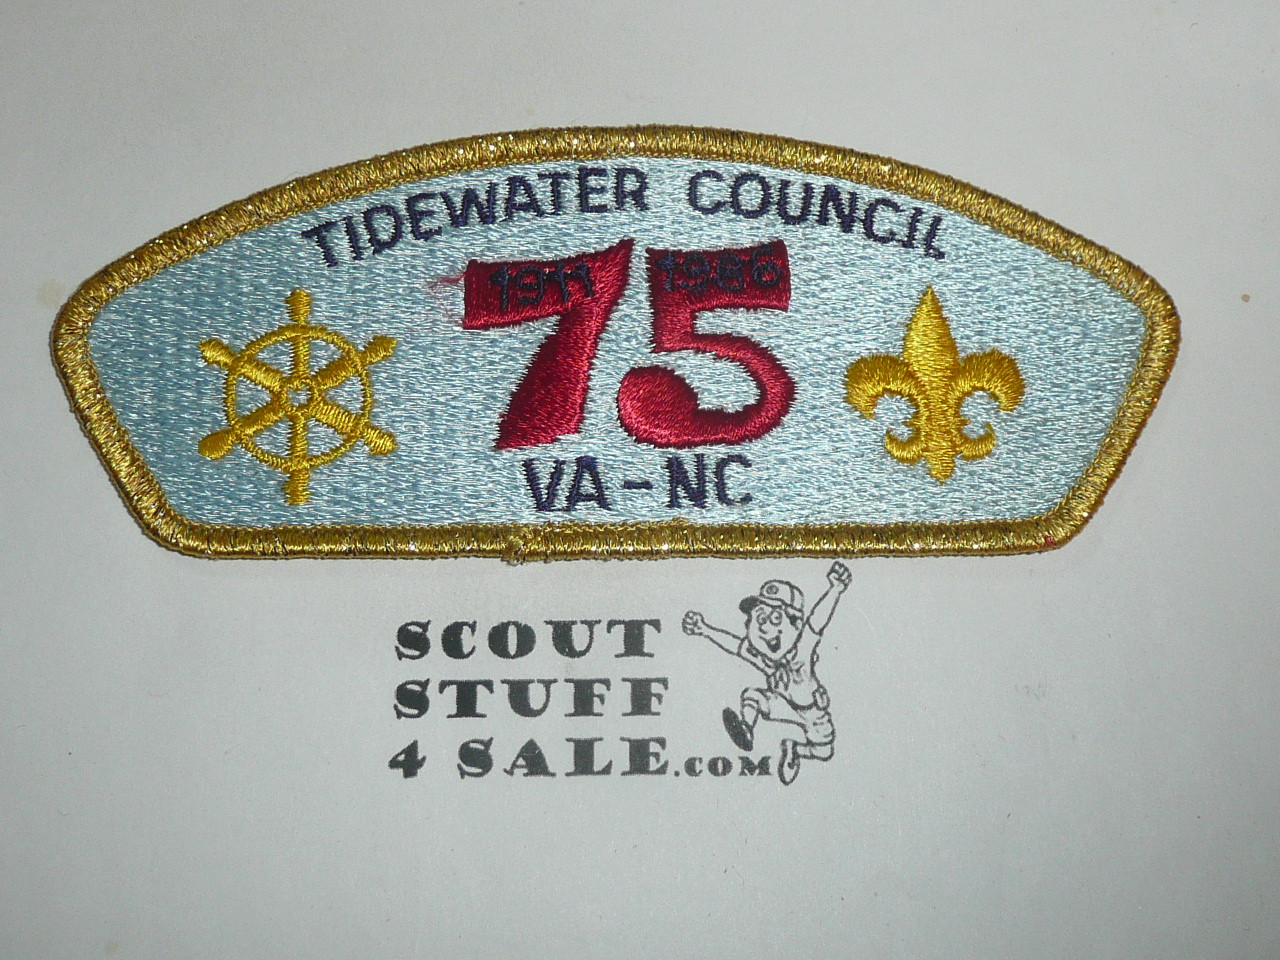 Tidewater Council s5 CSP